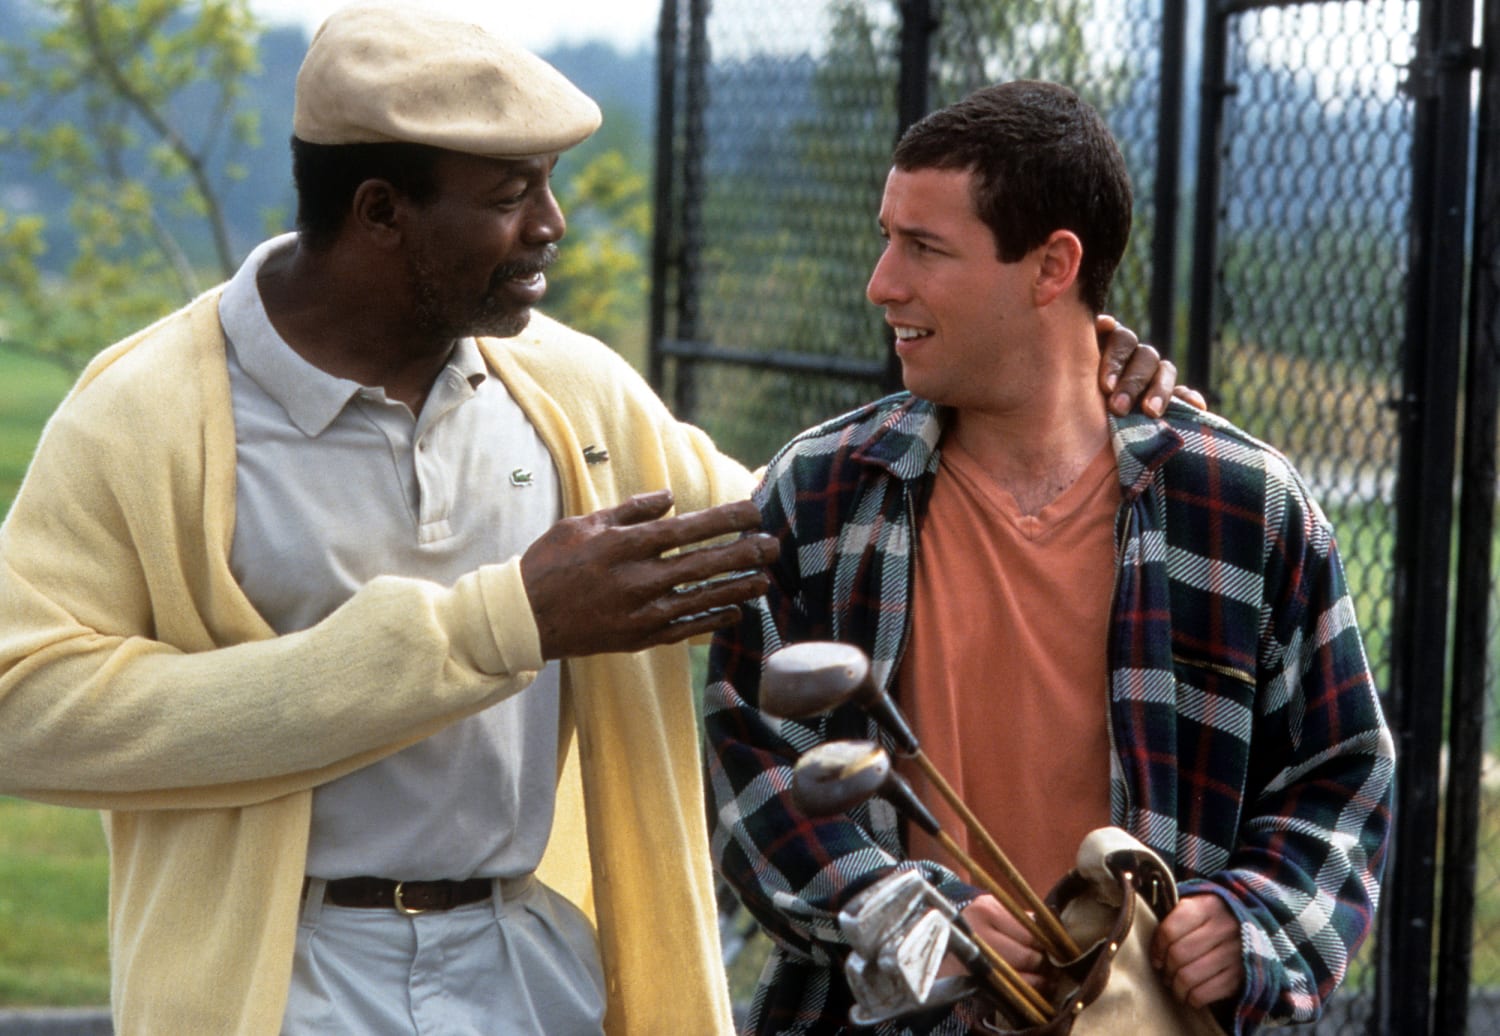 Go get em': Adam Sandler wishes real-life Happy Gilmore luck after Ball  State commitment